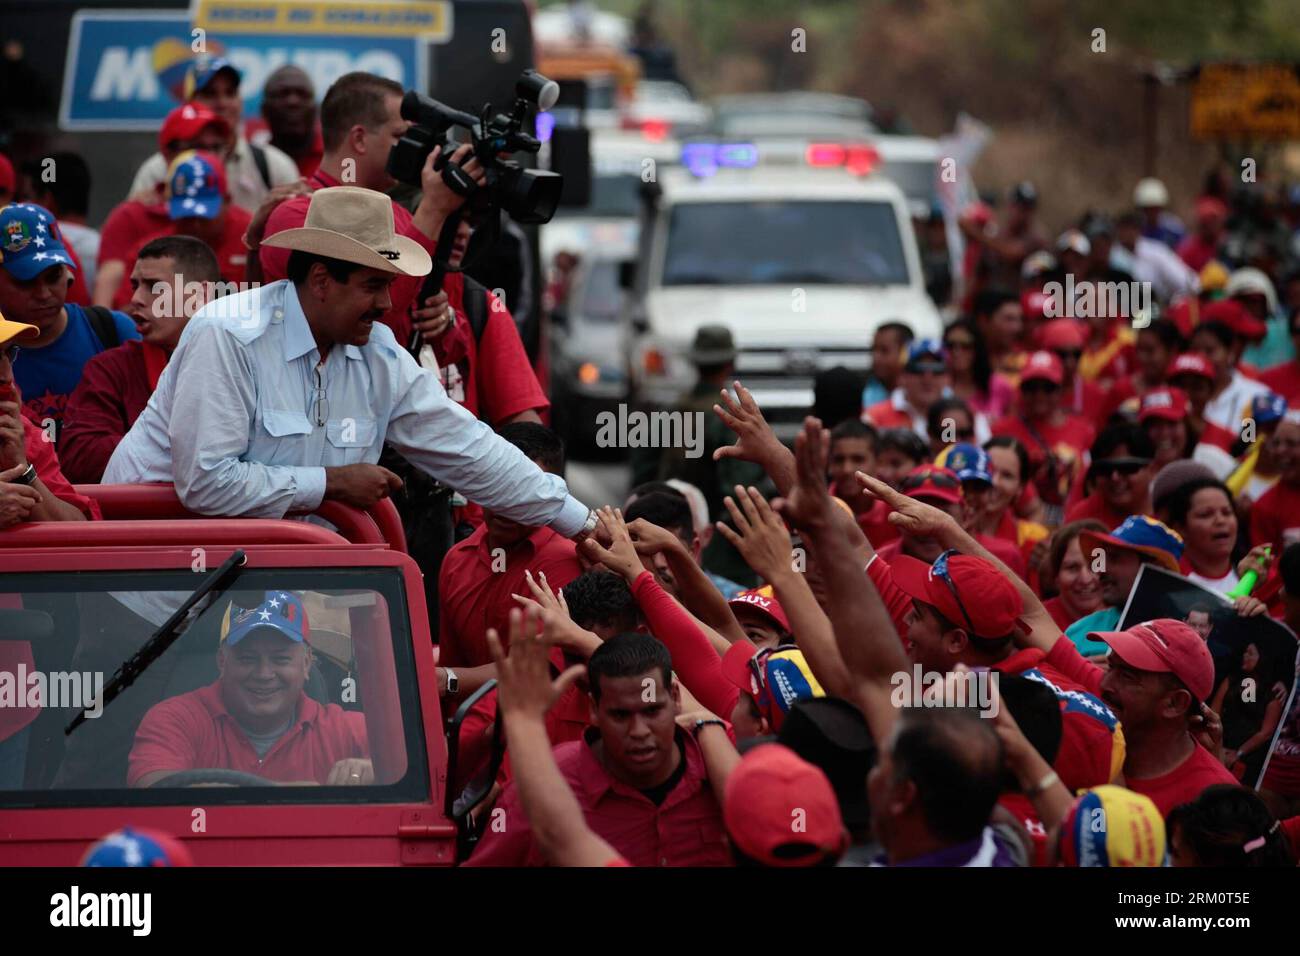 Bildnummer: 59468340  Datum: 02.04.2013  Copyright: imago/Xinhua (130403) -- BARINAS, April 3, 2013 (Xinhua) -- Photo provided by Command Campaign Hugo Chavez shows Venezuela s Acting President and presidential candidate Nicolas Maduro clapping with supporters as President of Venezuelan Parliament Disodado Cabello drives the vehicle before a rally in Barinas, Venezuela, April 2, 2013. The electoral campaign in Venezuela, heading for the upcoming presidential elections on April 14, officially started on Tuesday and will run for 10 days, during which the candidates will present their proposals t Stock Photo